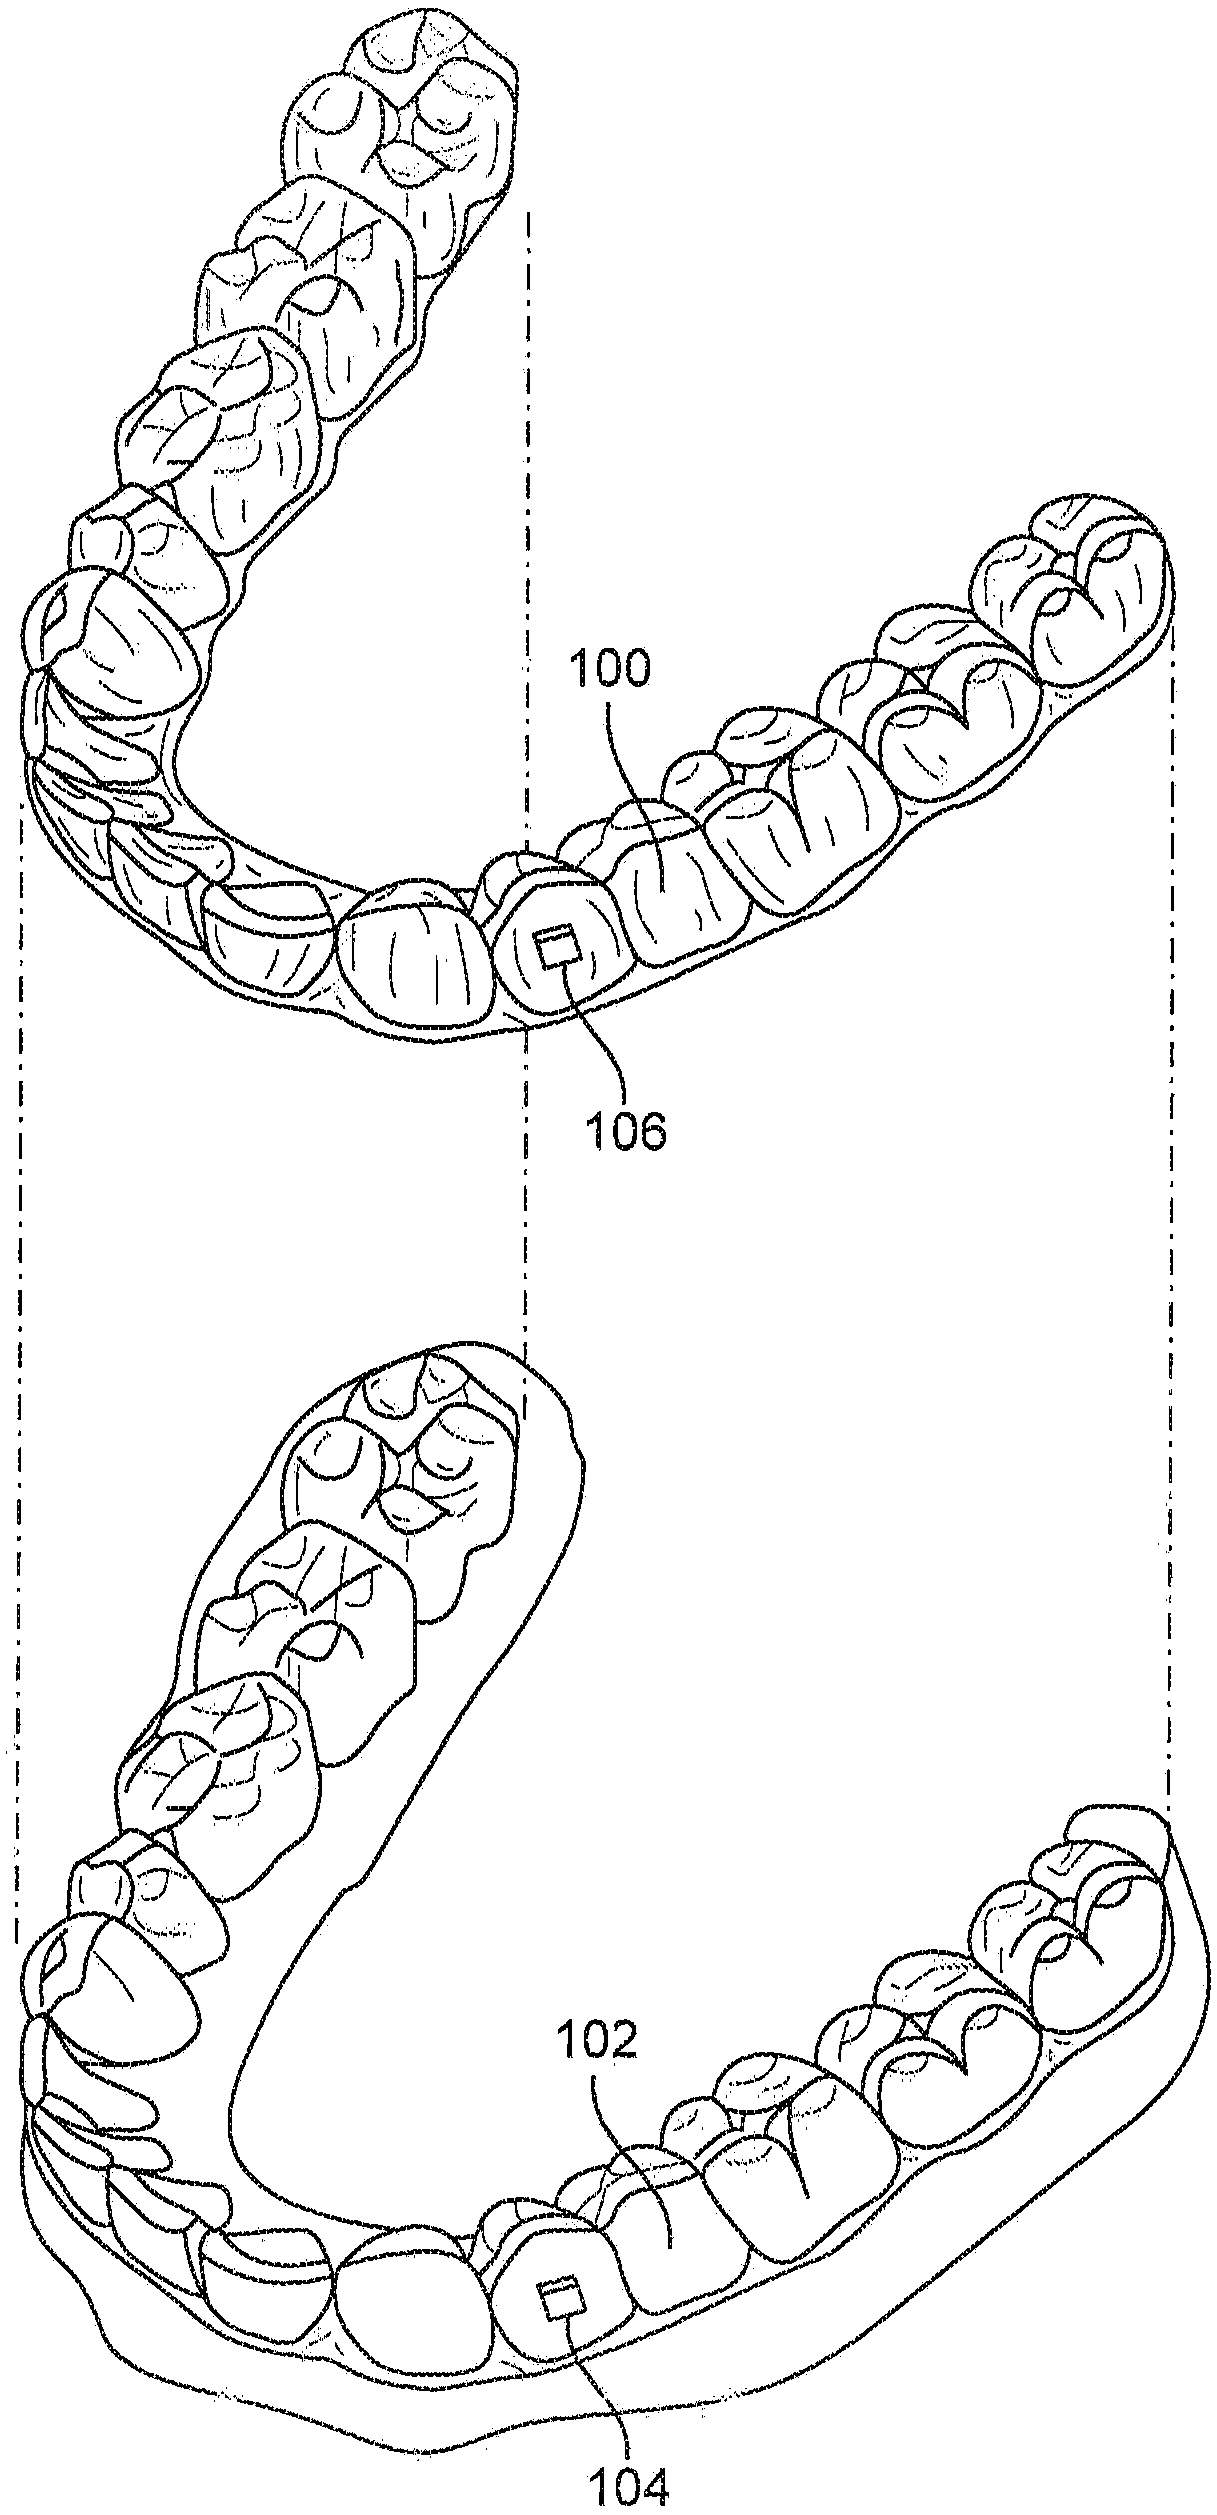 Fabrication of attachment templates and multi-material aligners